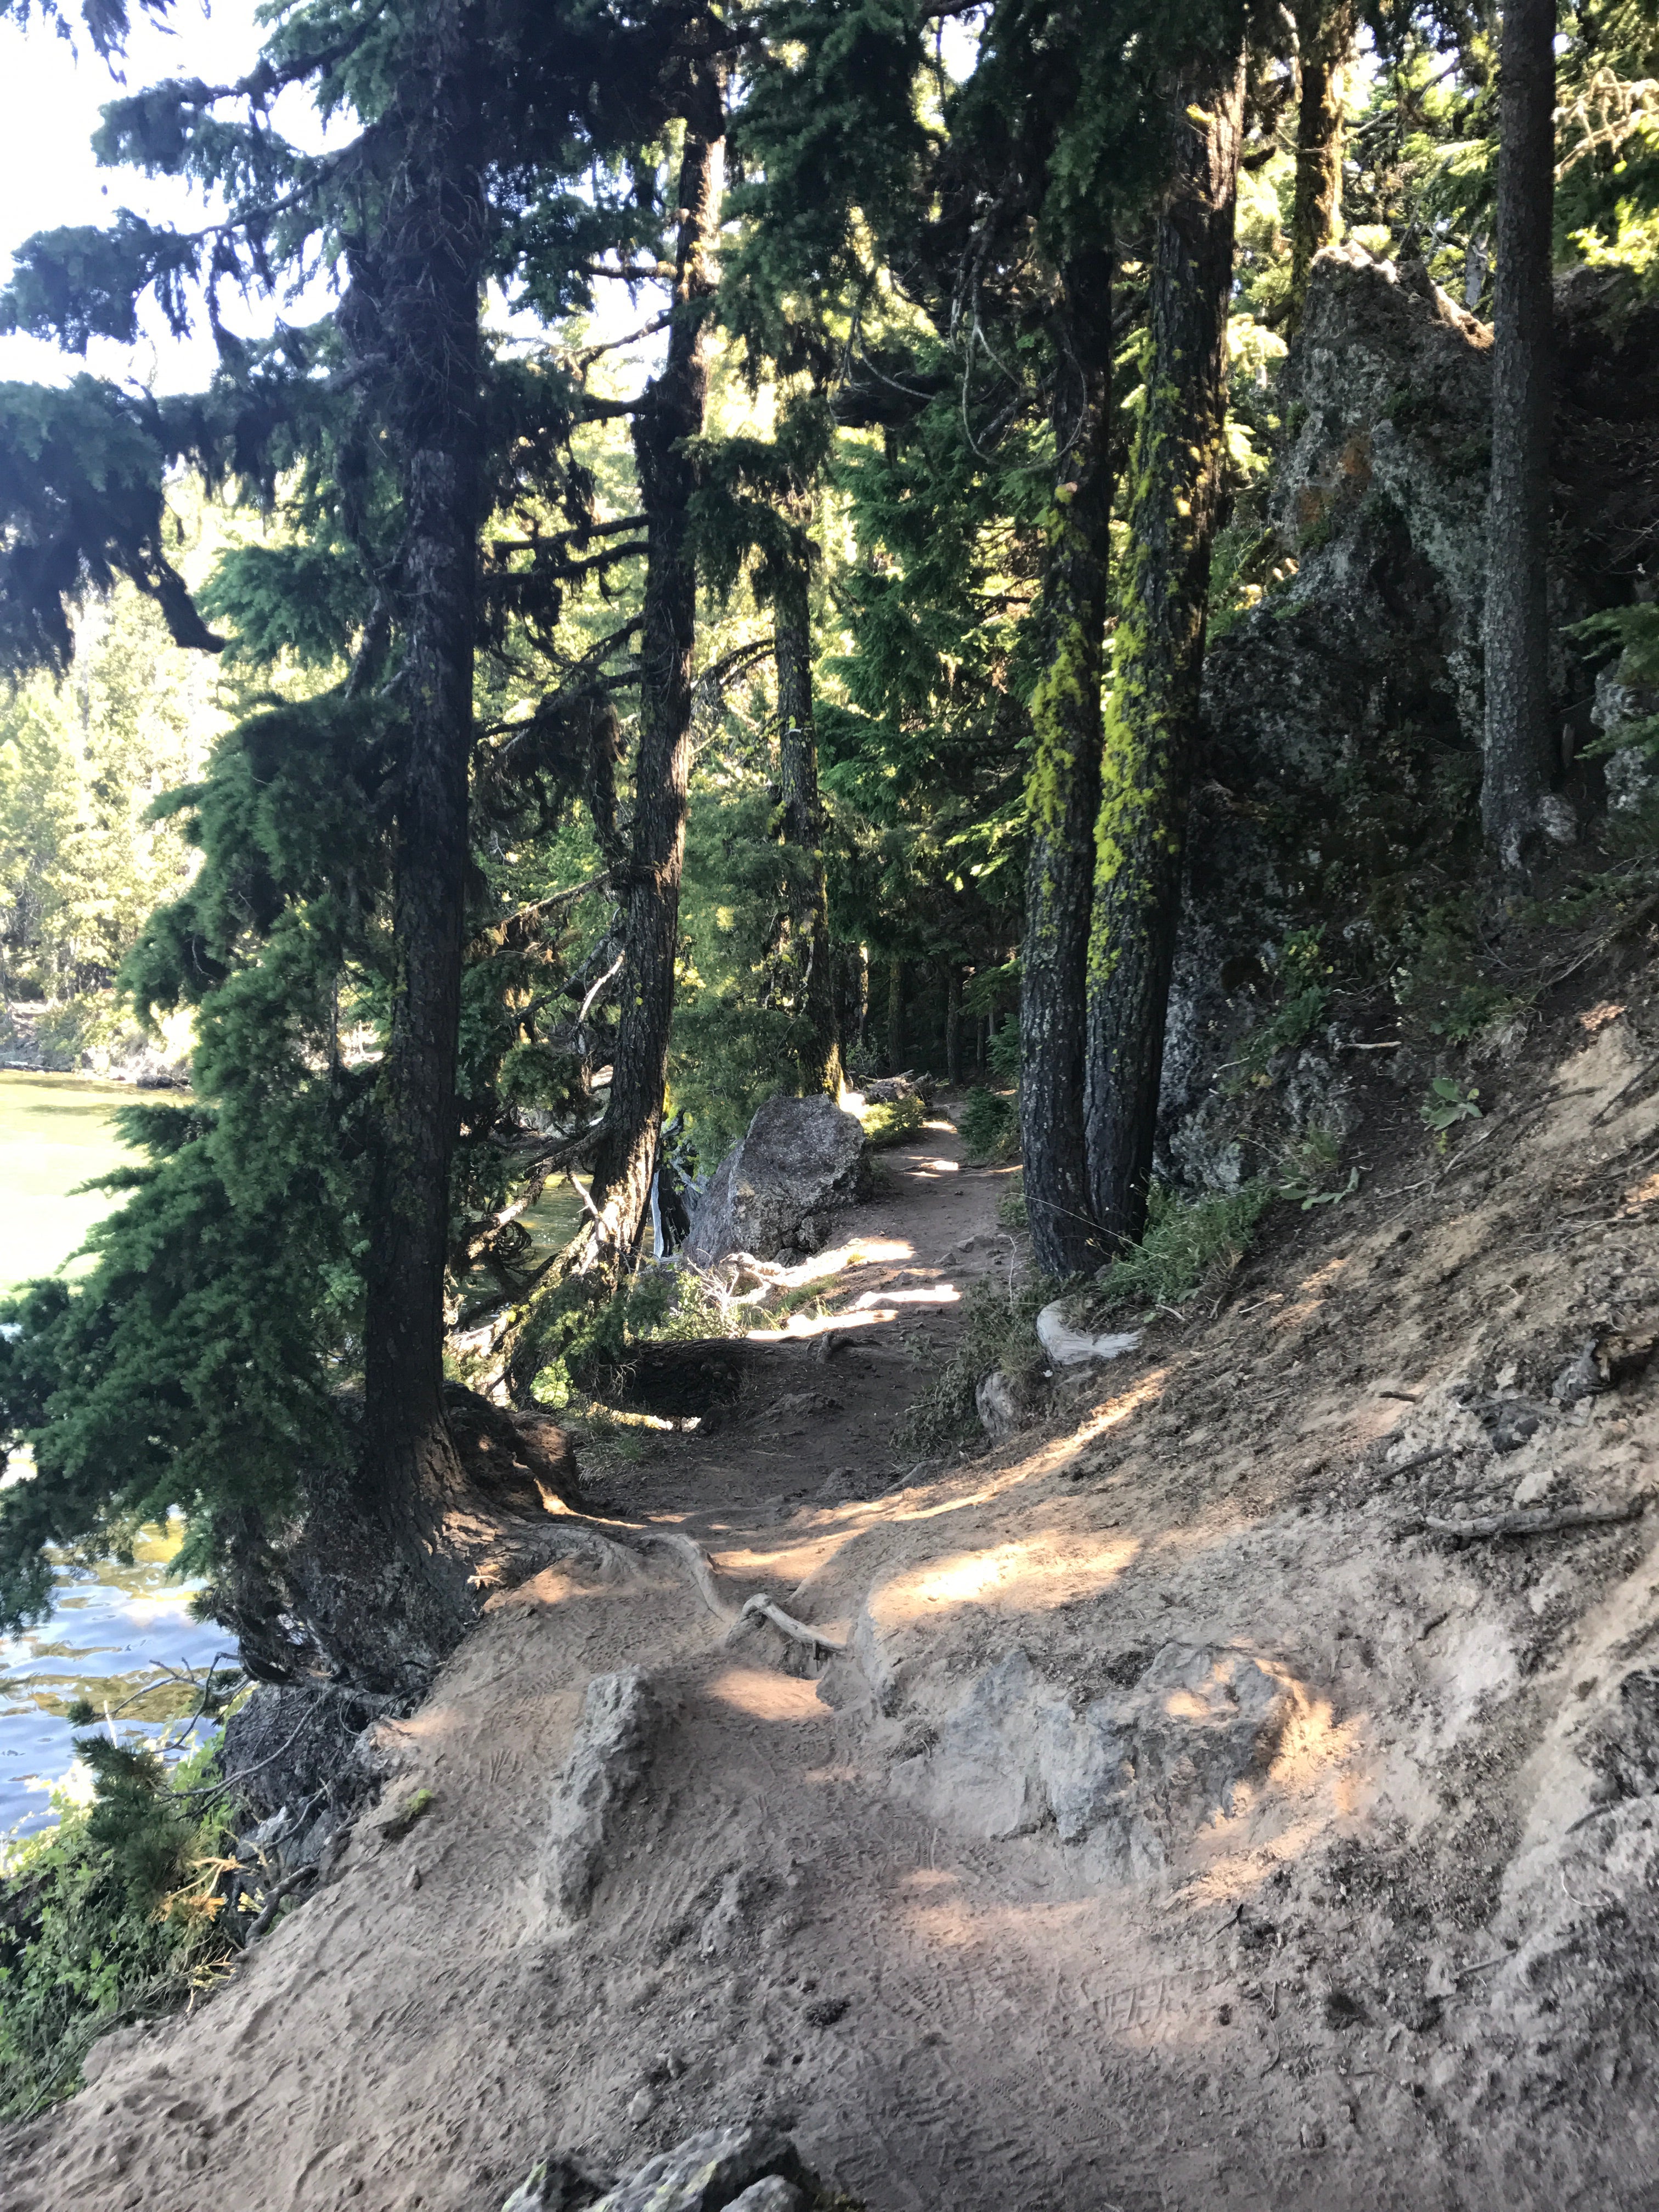 Trail at the north end of the campground